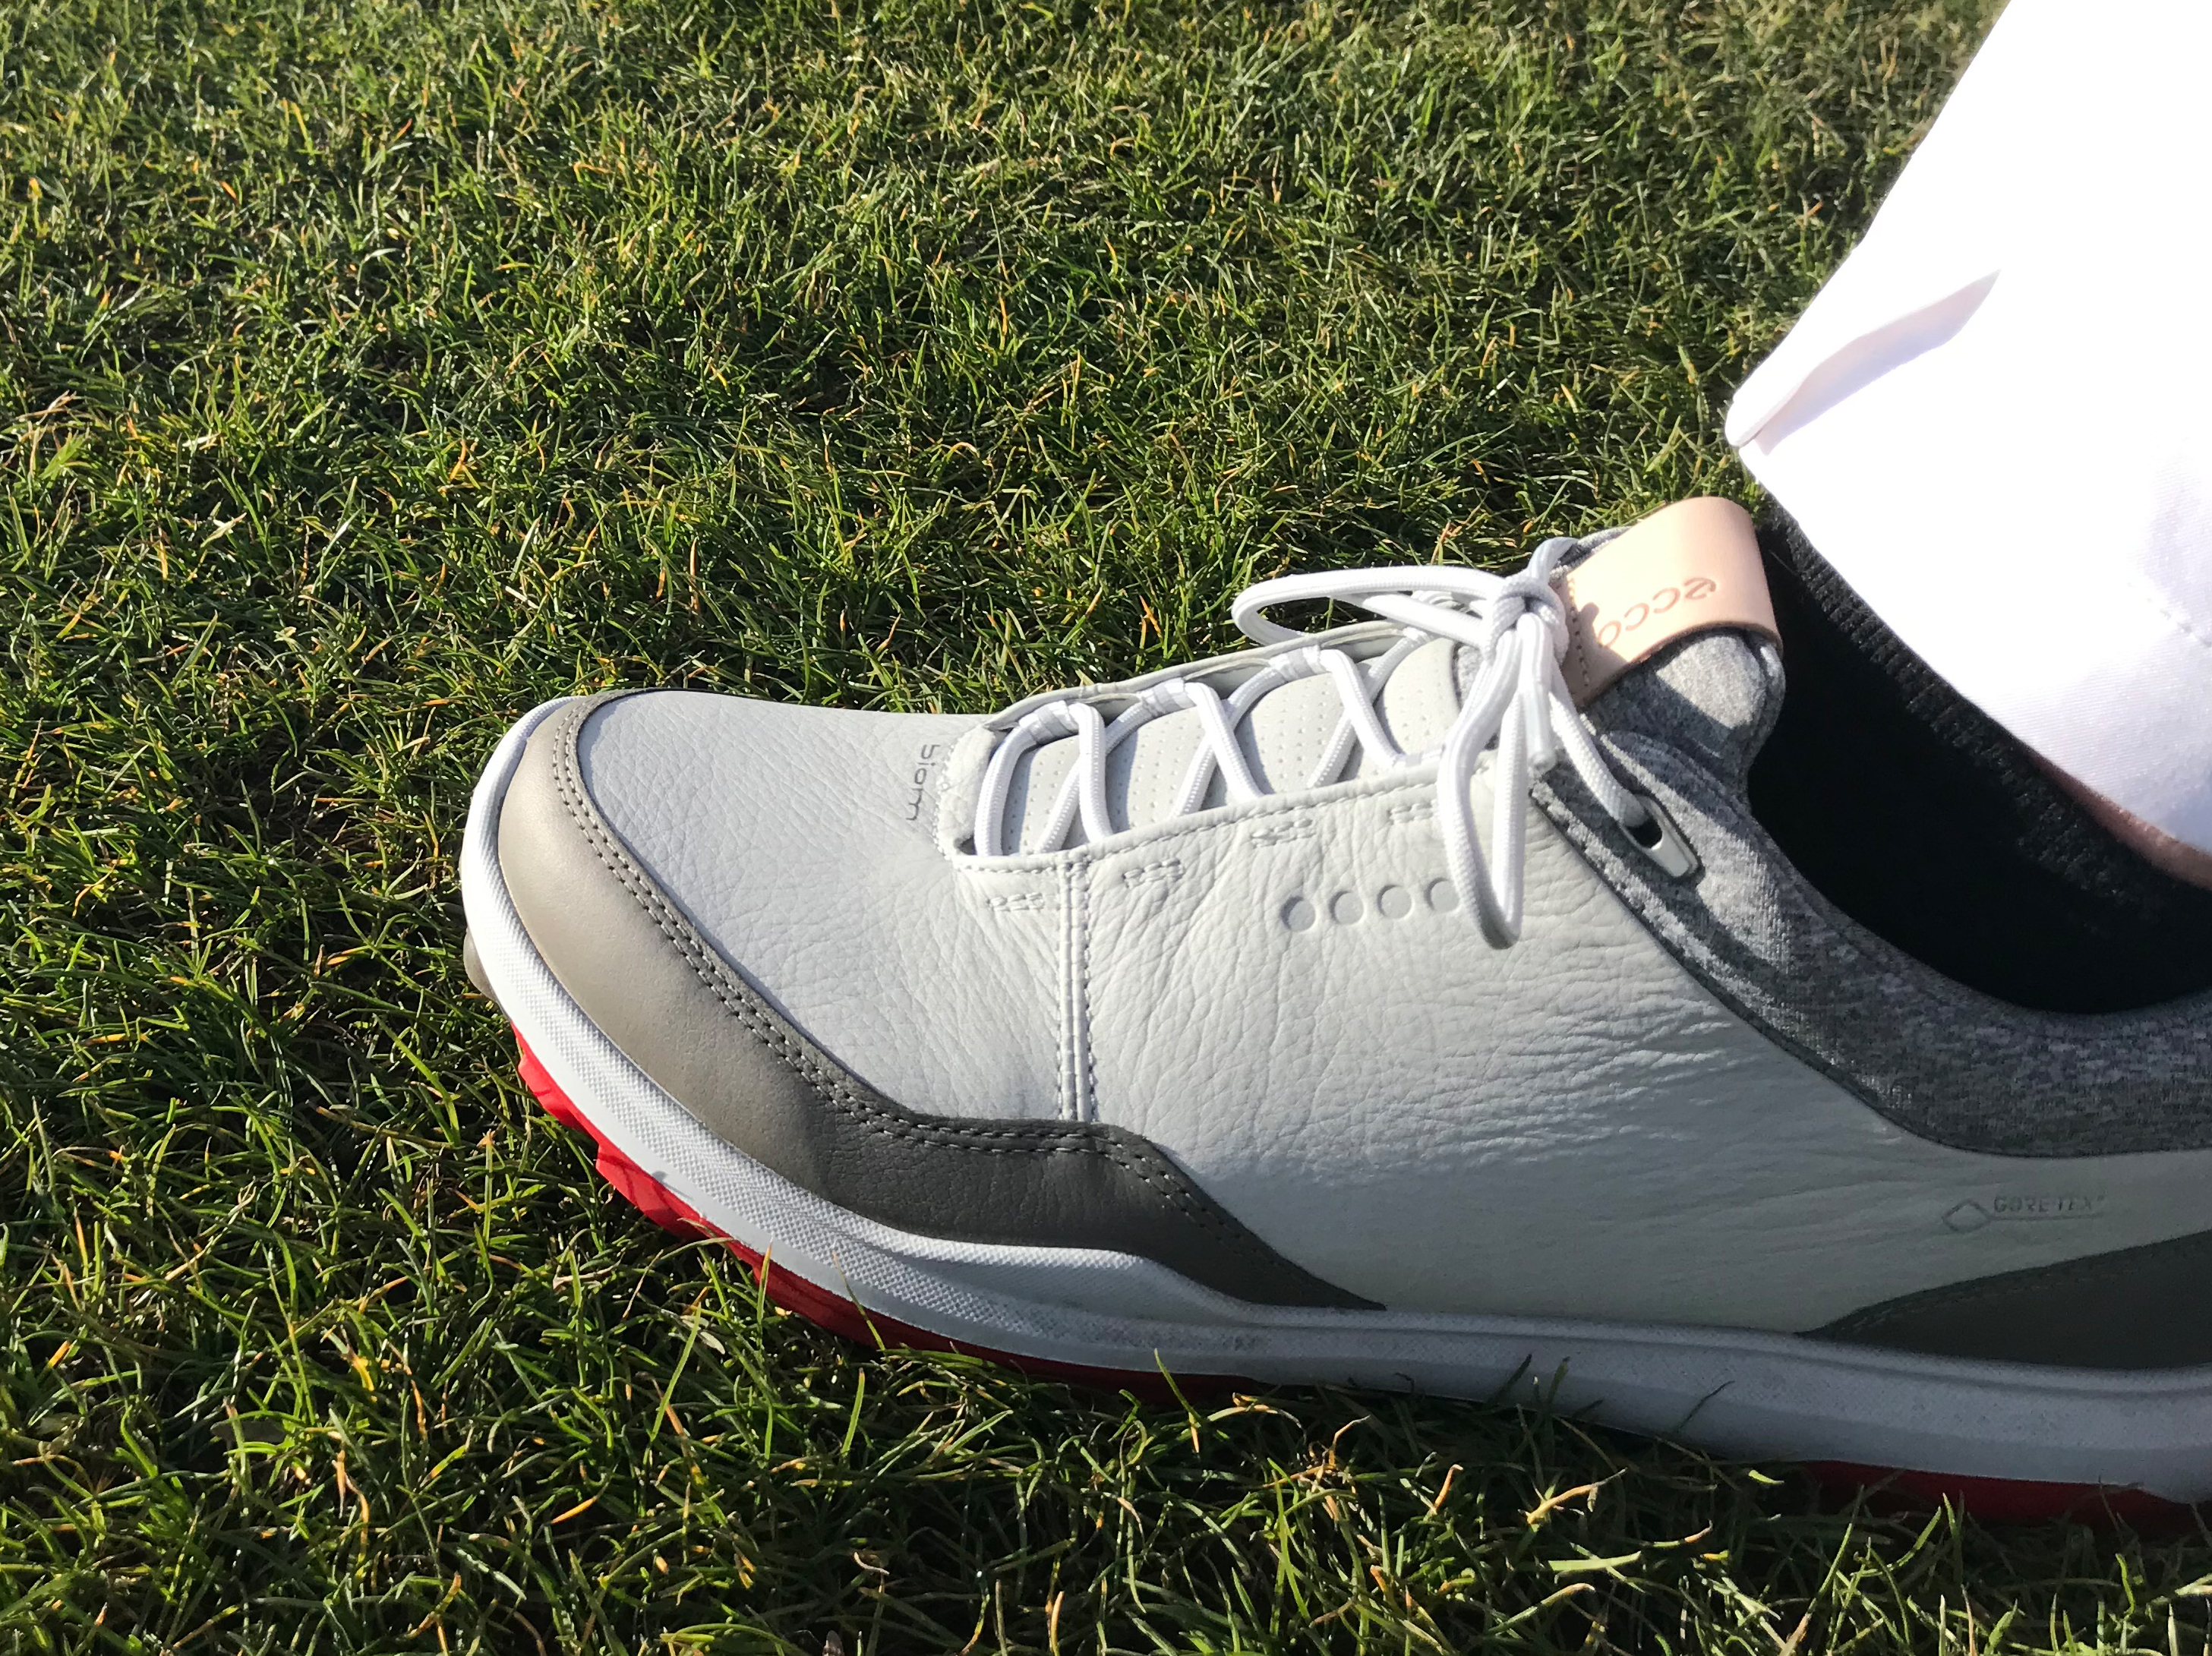 Product Review: Ecco Golf Shoes | The Golf Project